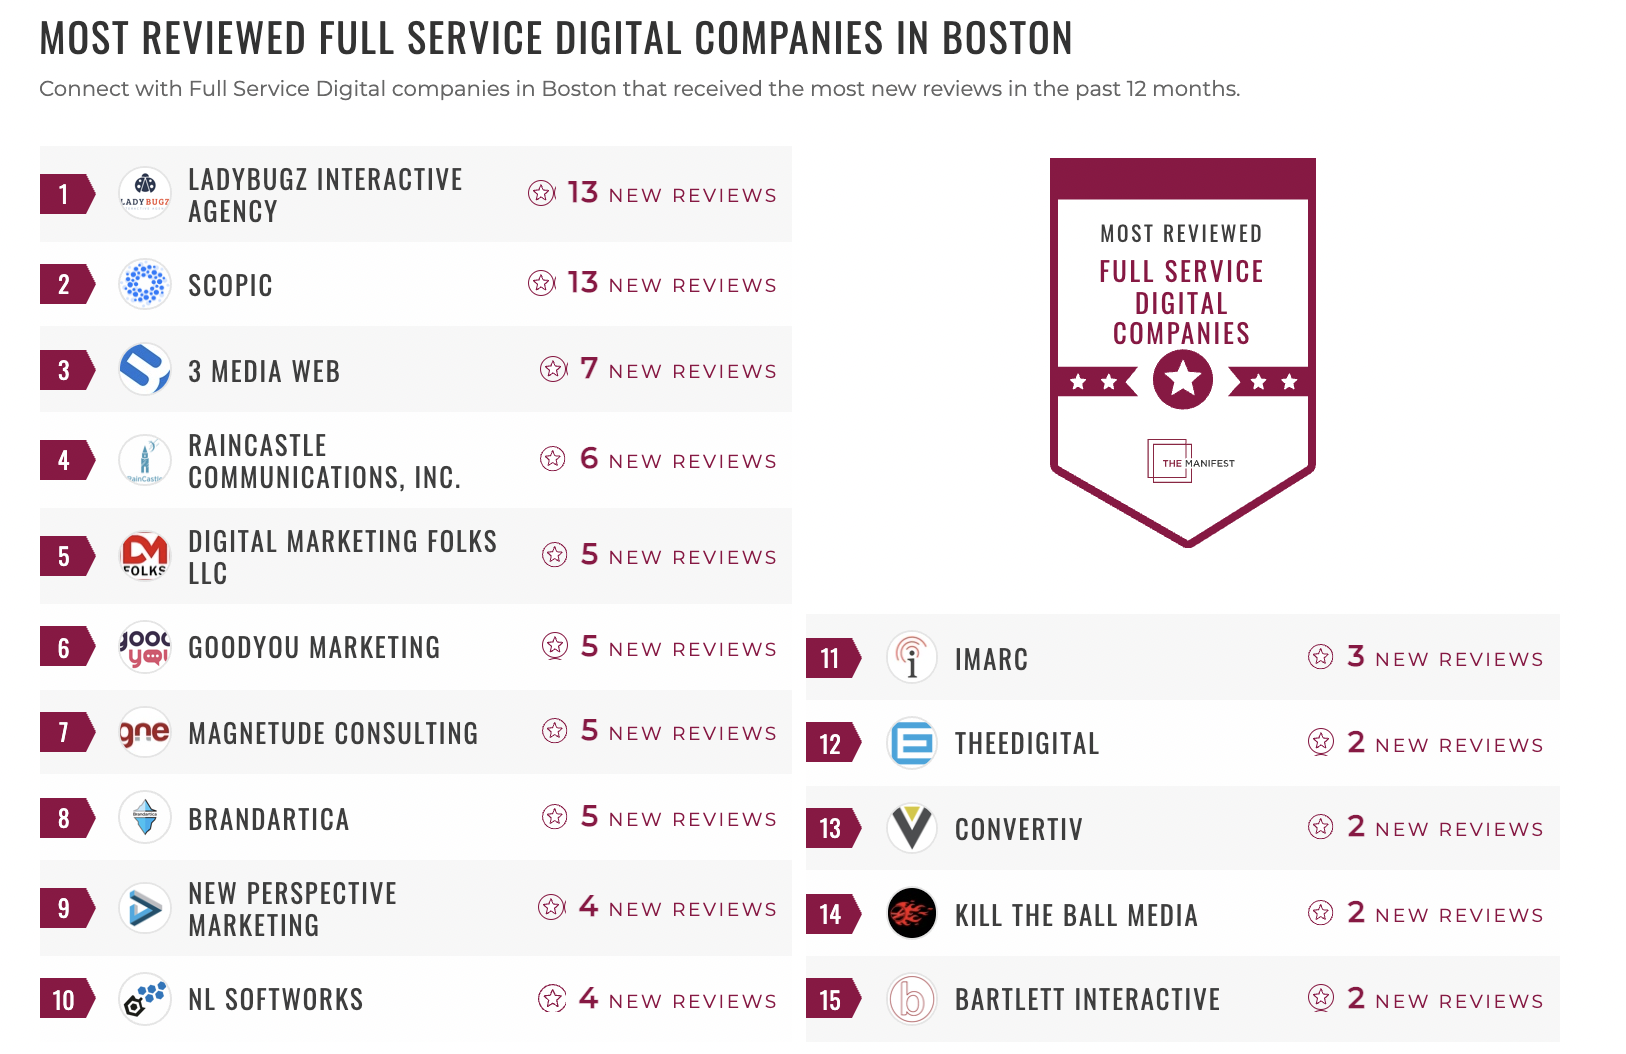 Most Reviewed Full Service Digital Companies in Boston